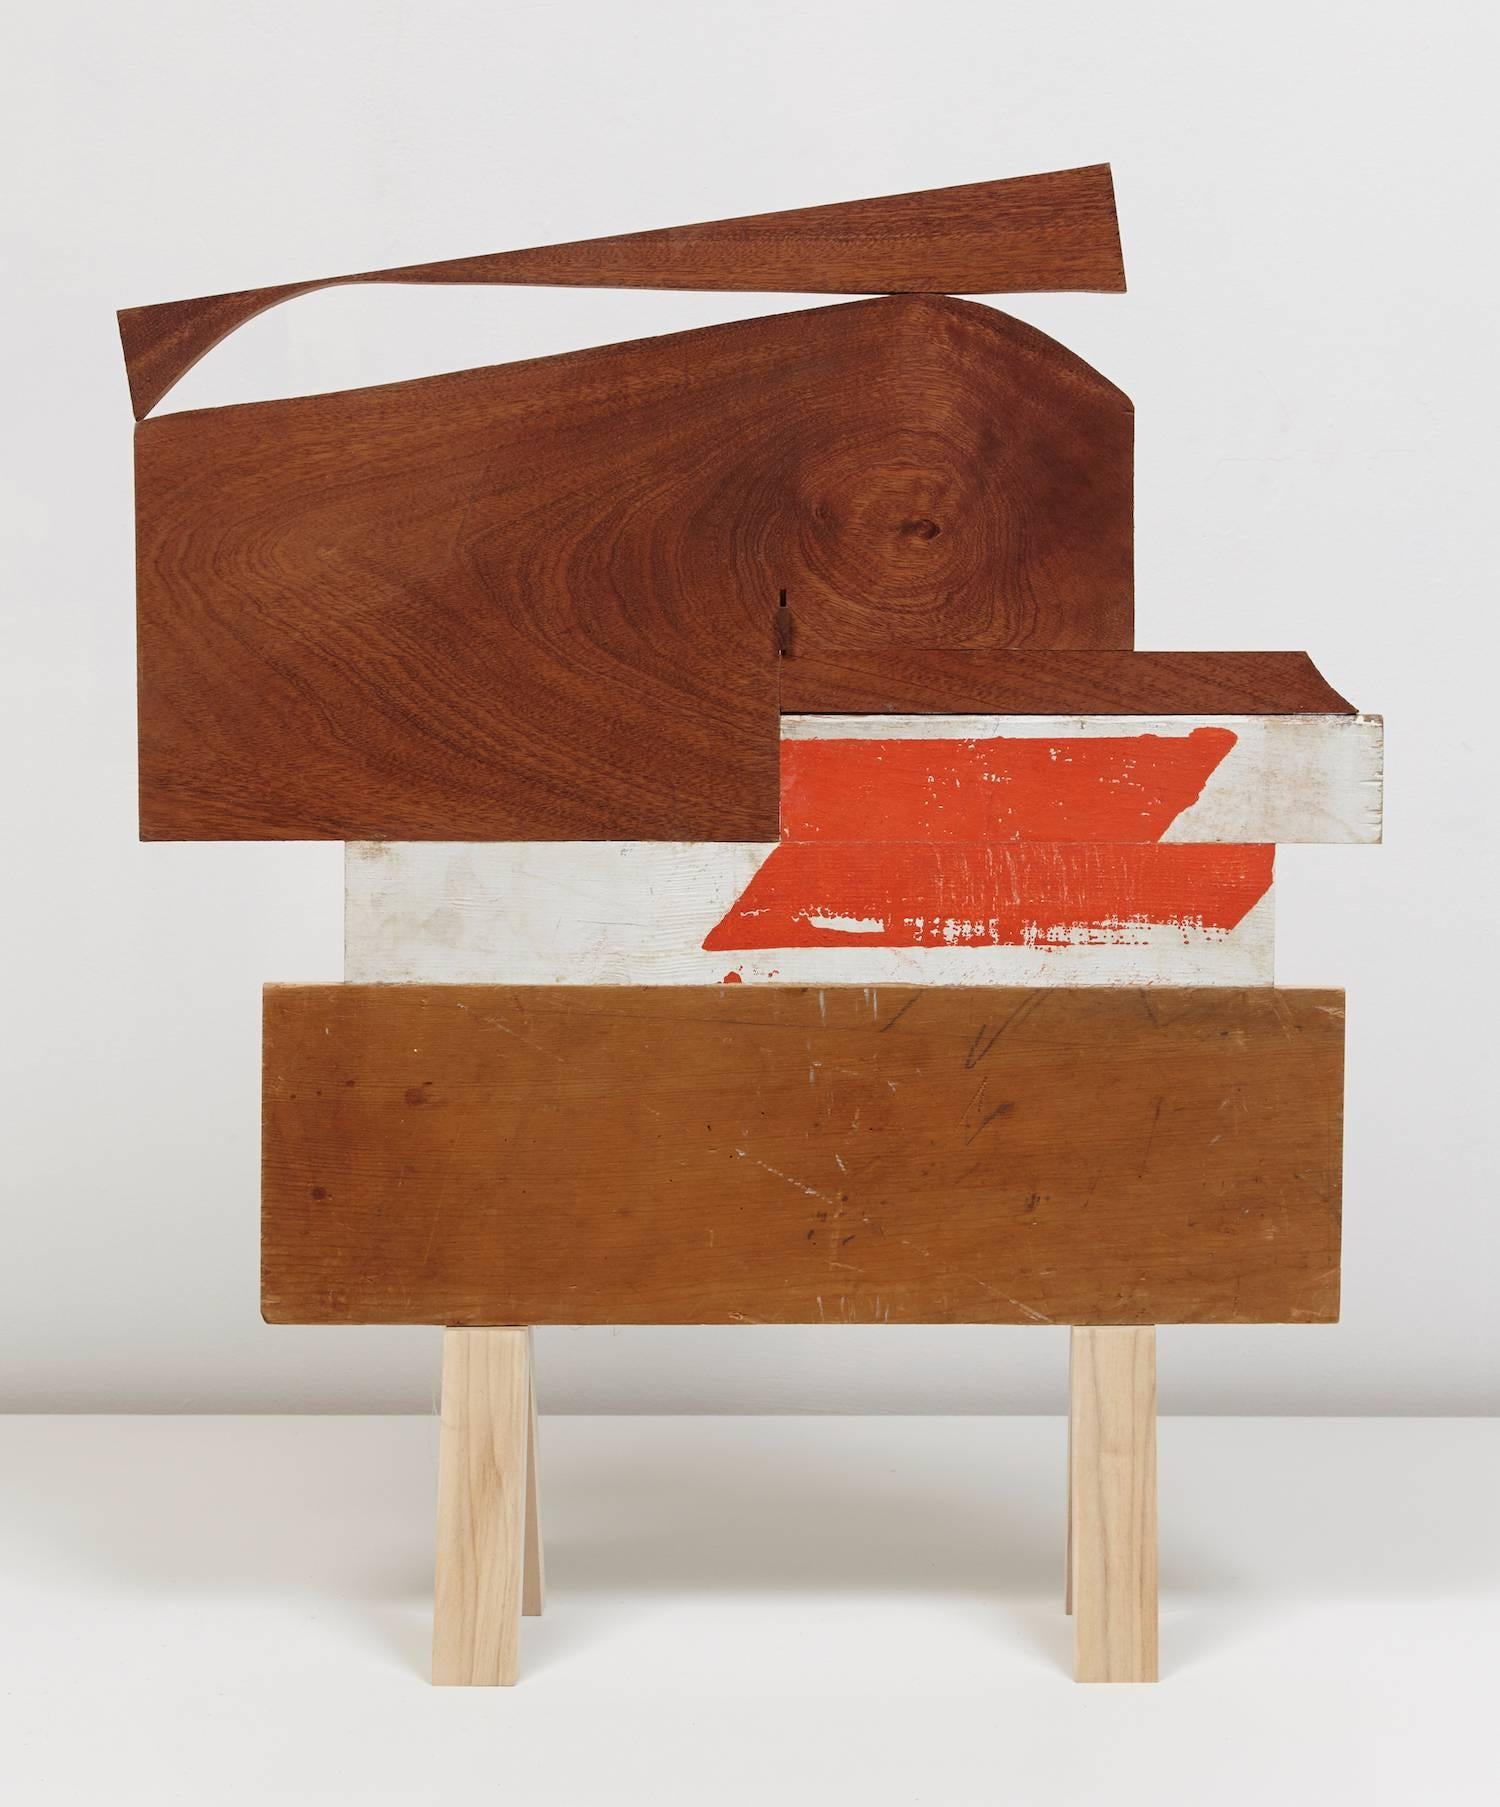 Emily Feinstein grew up with a father who was a cabinetmaker with a shop in the basement.  She spent a lot of time making things and constructing with wood. Her ongoing interest in raw materials and the structures we build and use in the every day